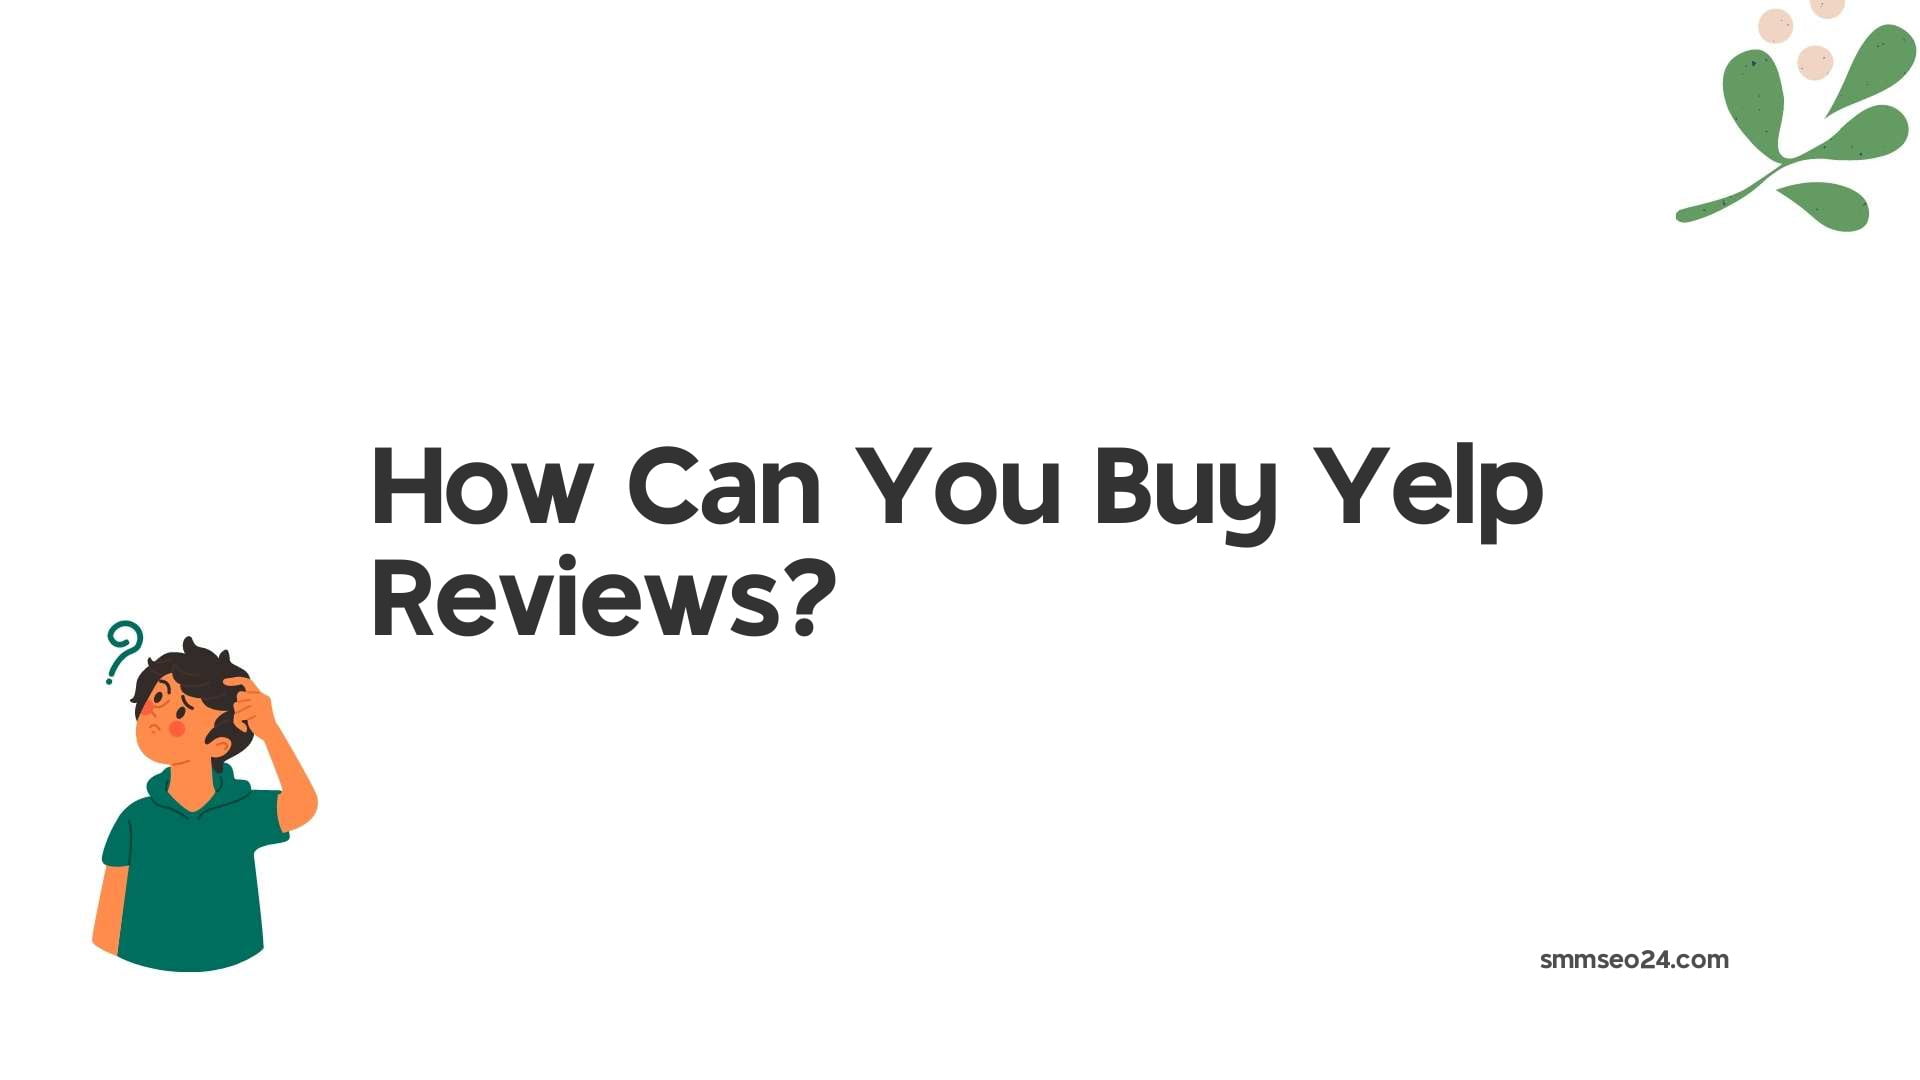 How Can You Buy Yelp Reviews?